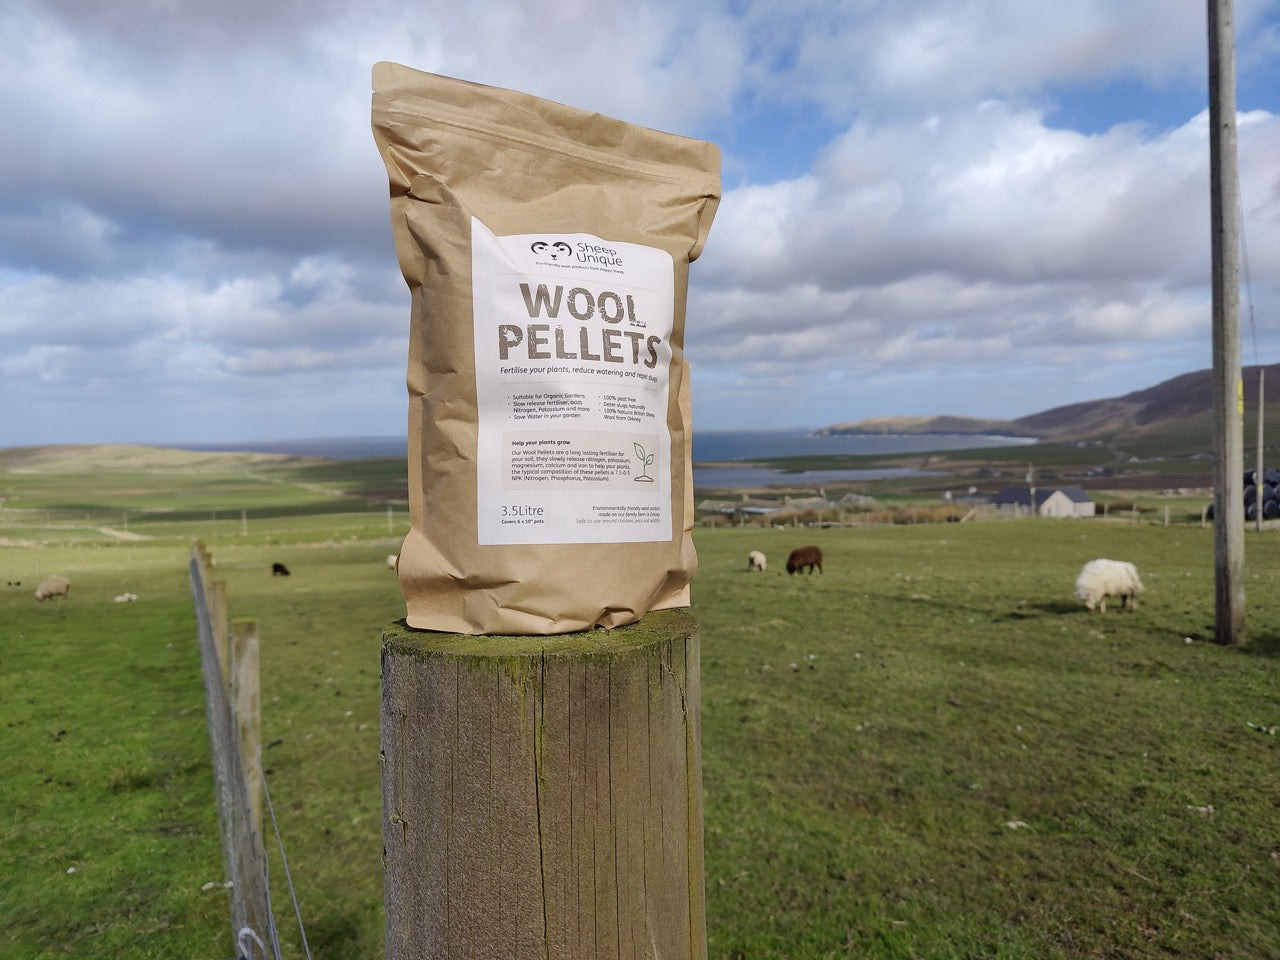 Sheep Wool Pellets on a fence post with sheep in the background